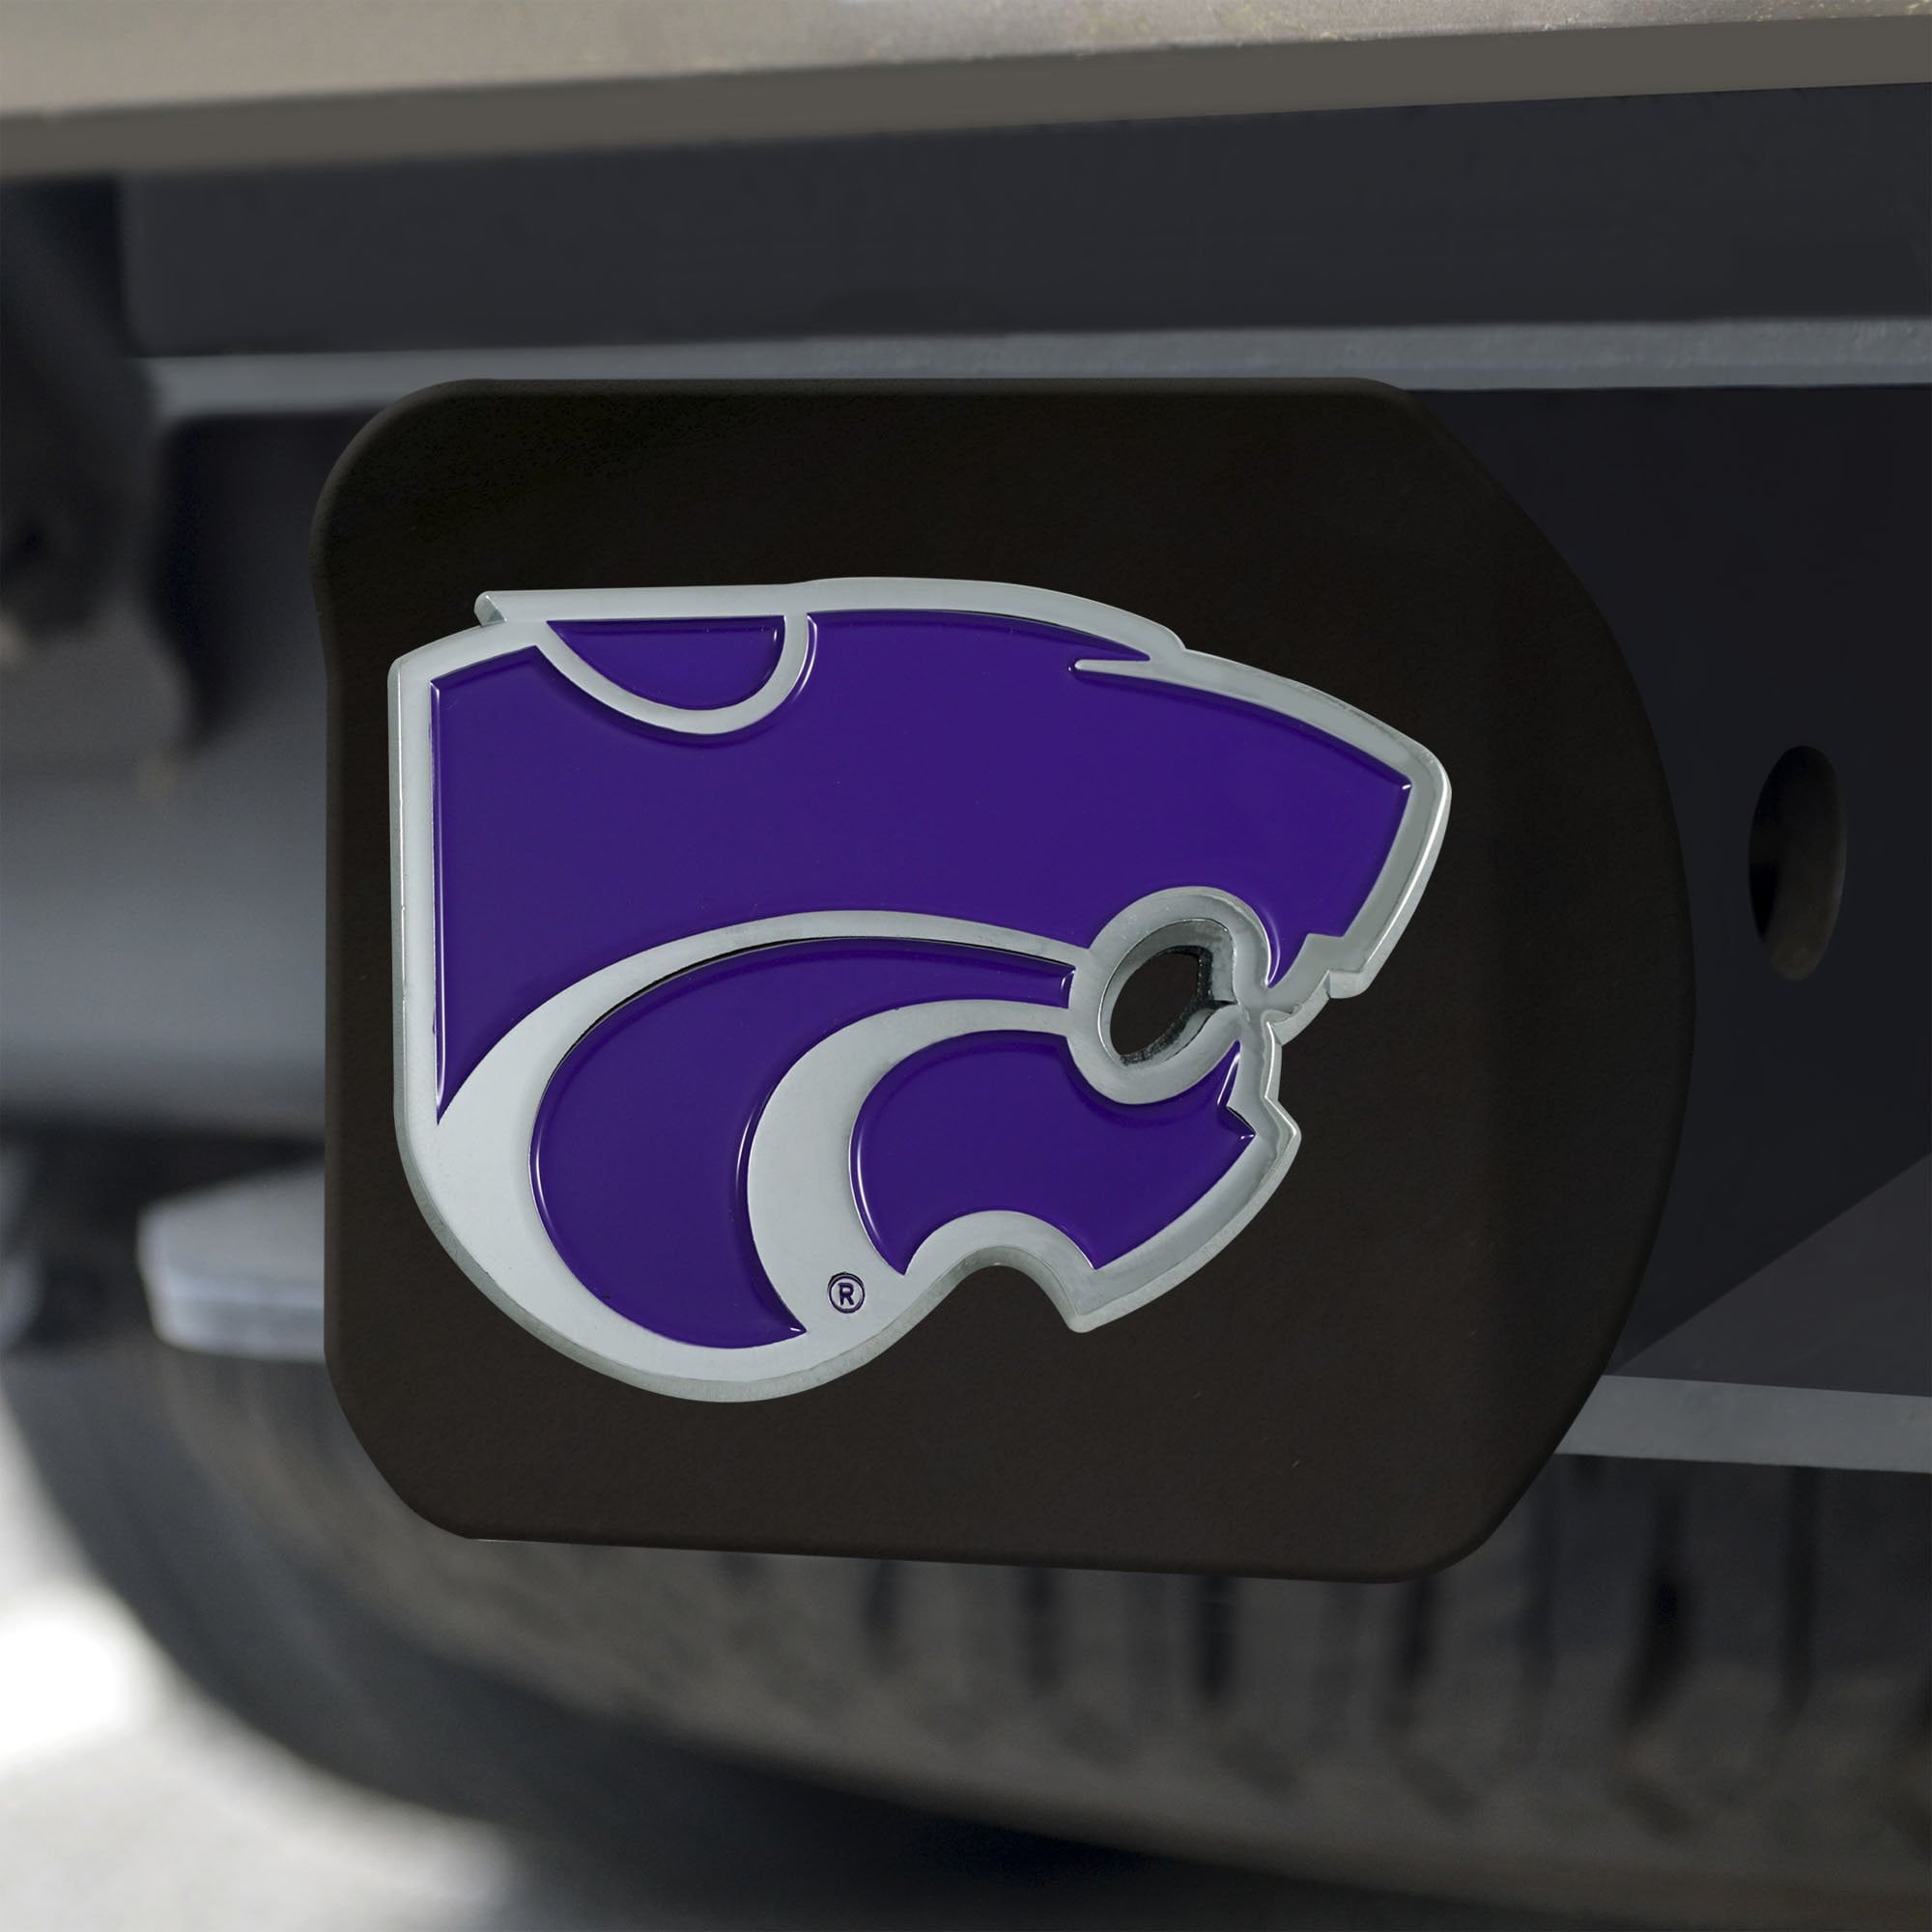 Kansas State Wildcats Color Hitch Cover - Black 3.4